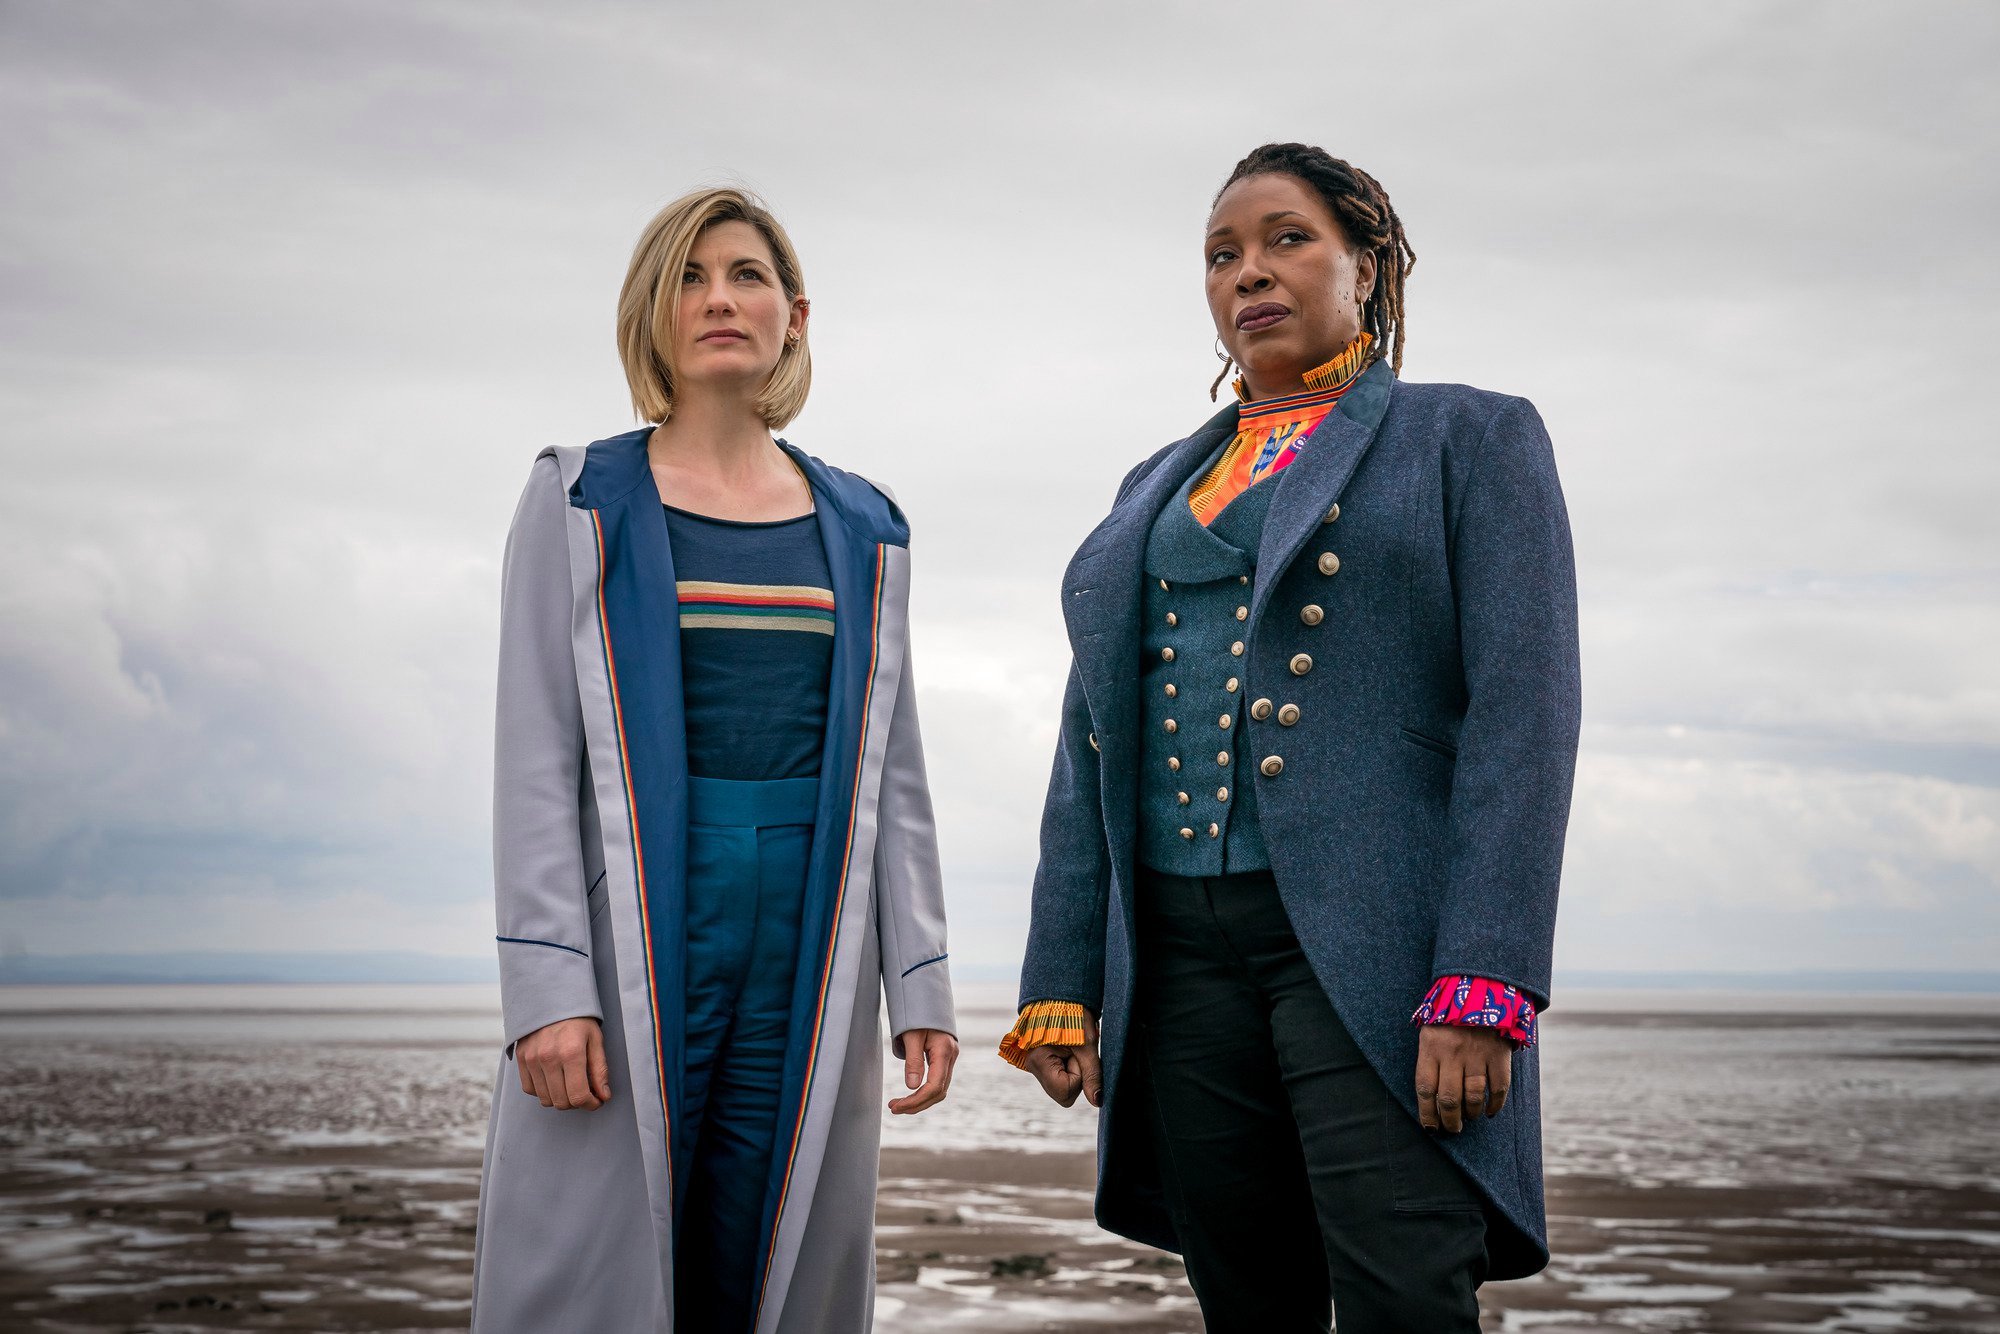 Jodie Whittaker as the Thirteenth Doctor and Jo Martin as Ruth!Doctor/The Fugitive Doctor in Doctor Who Season 12, Episode 5